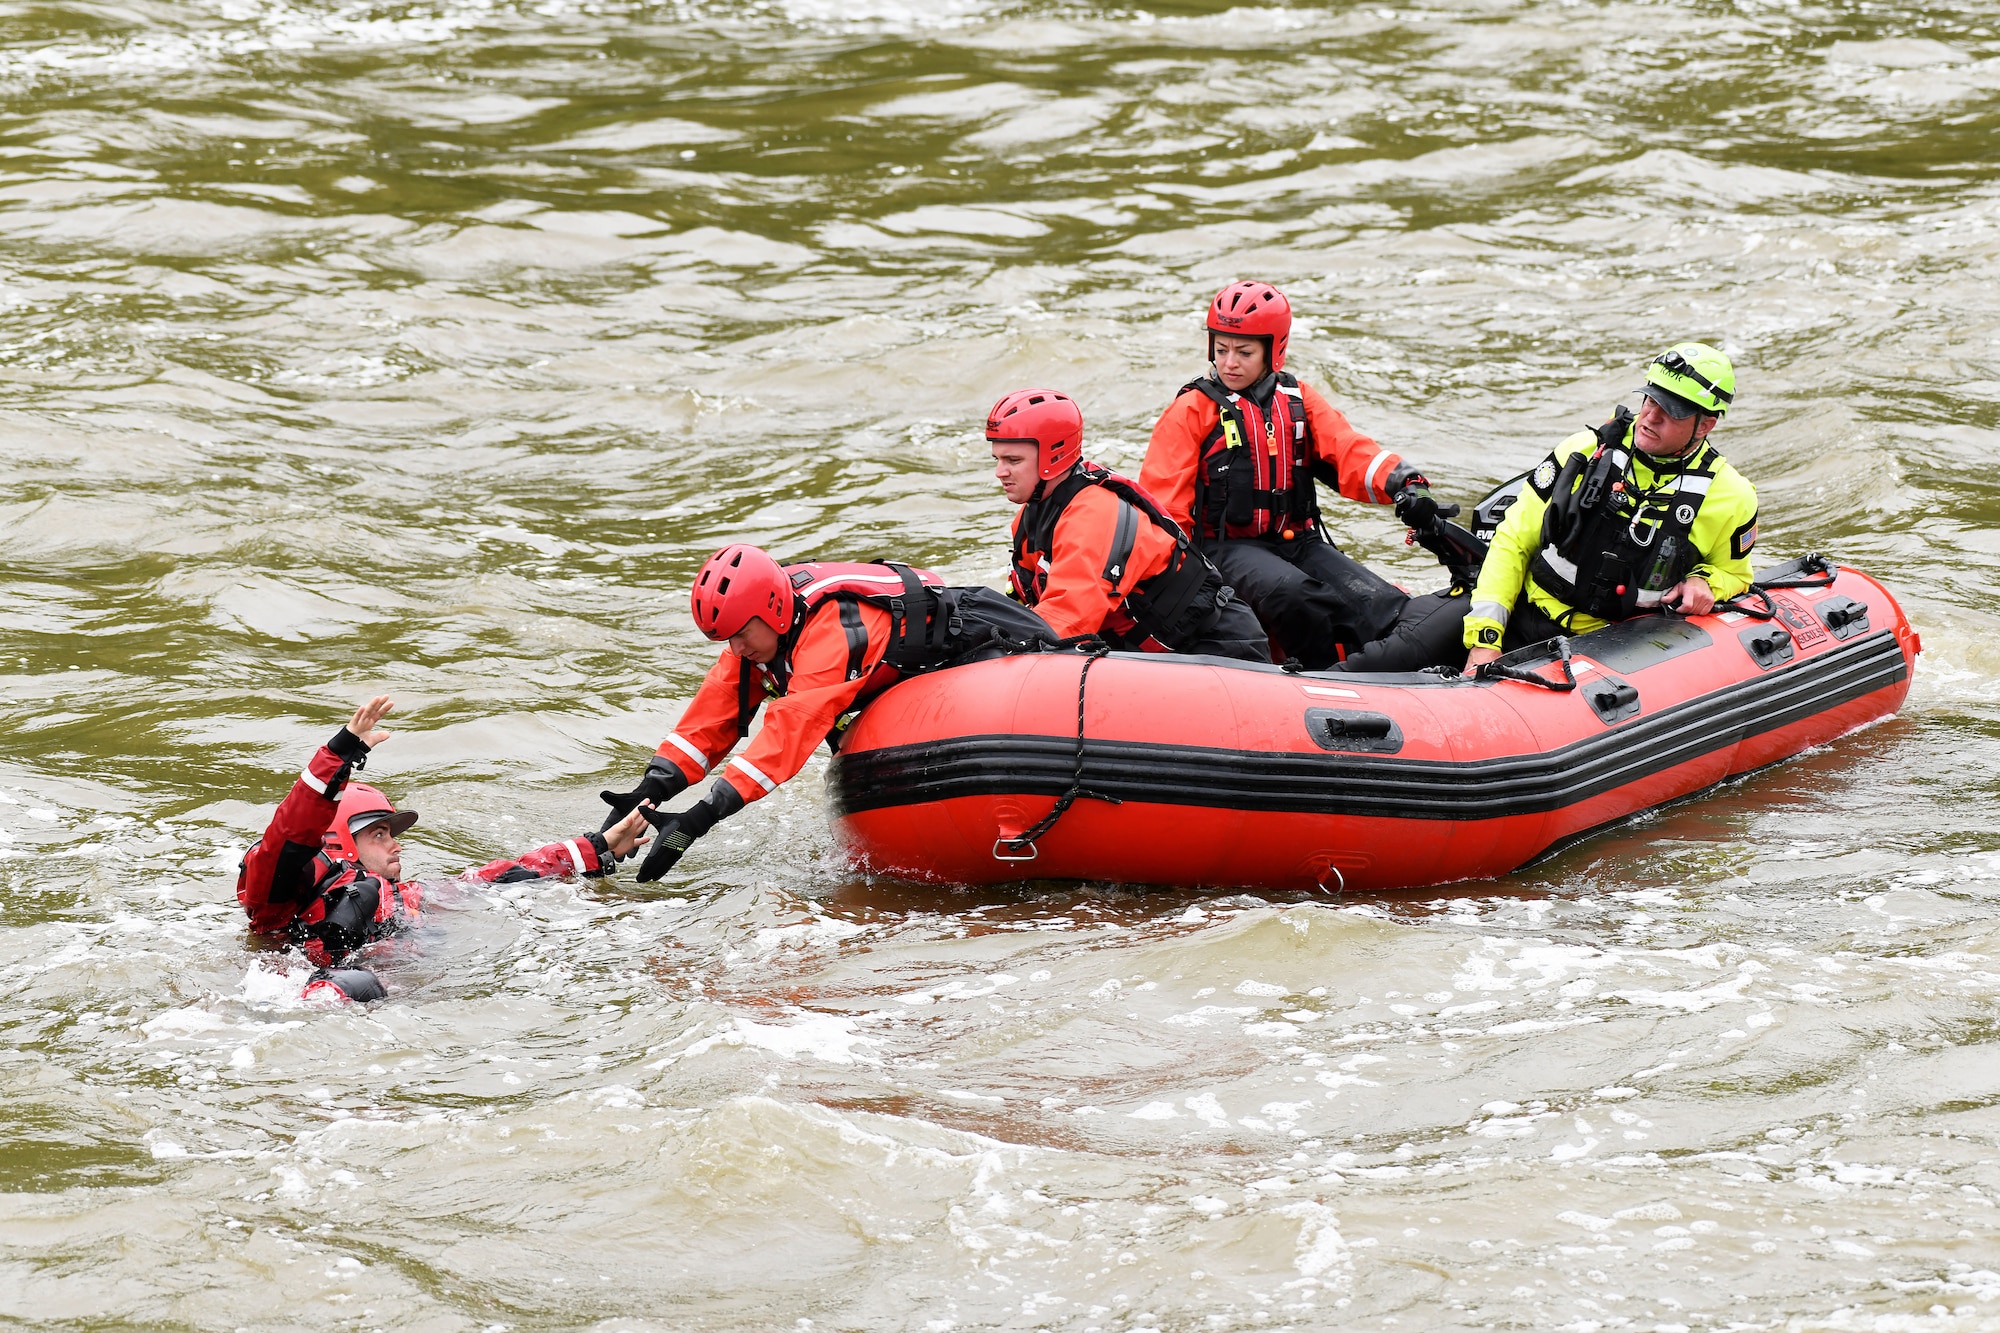 photo of Airmen on boat rescuing victim in water during training exercise